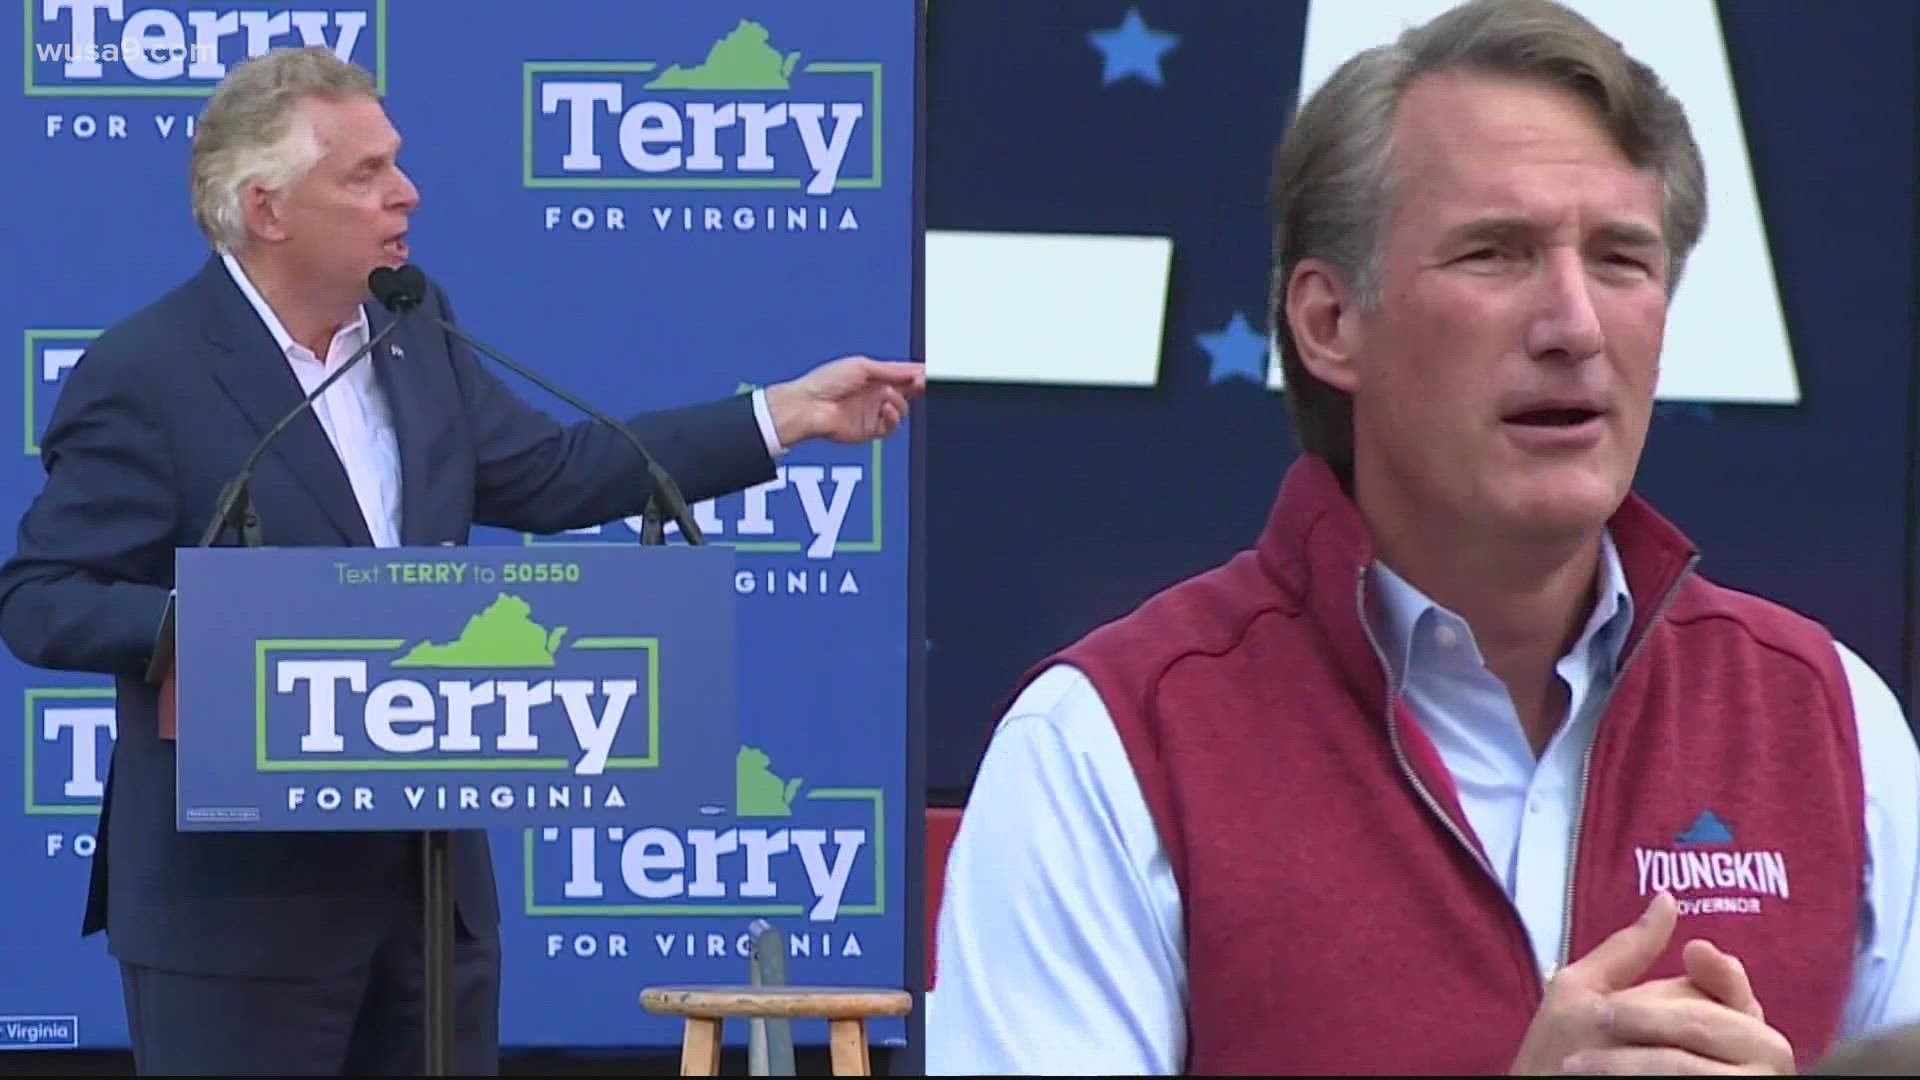 The Virginia gubernatorial election is tied as 7% of eligible voters are still undecided.